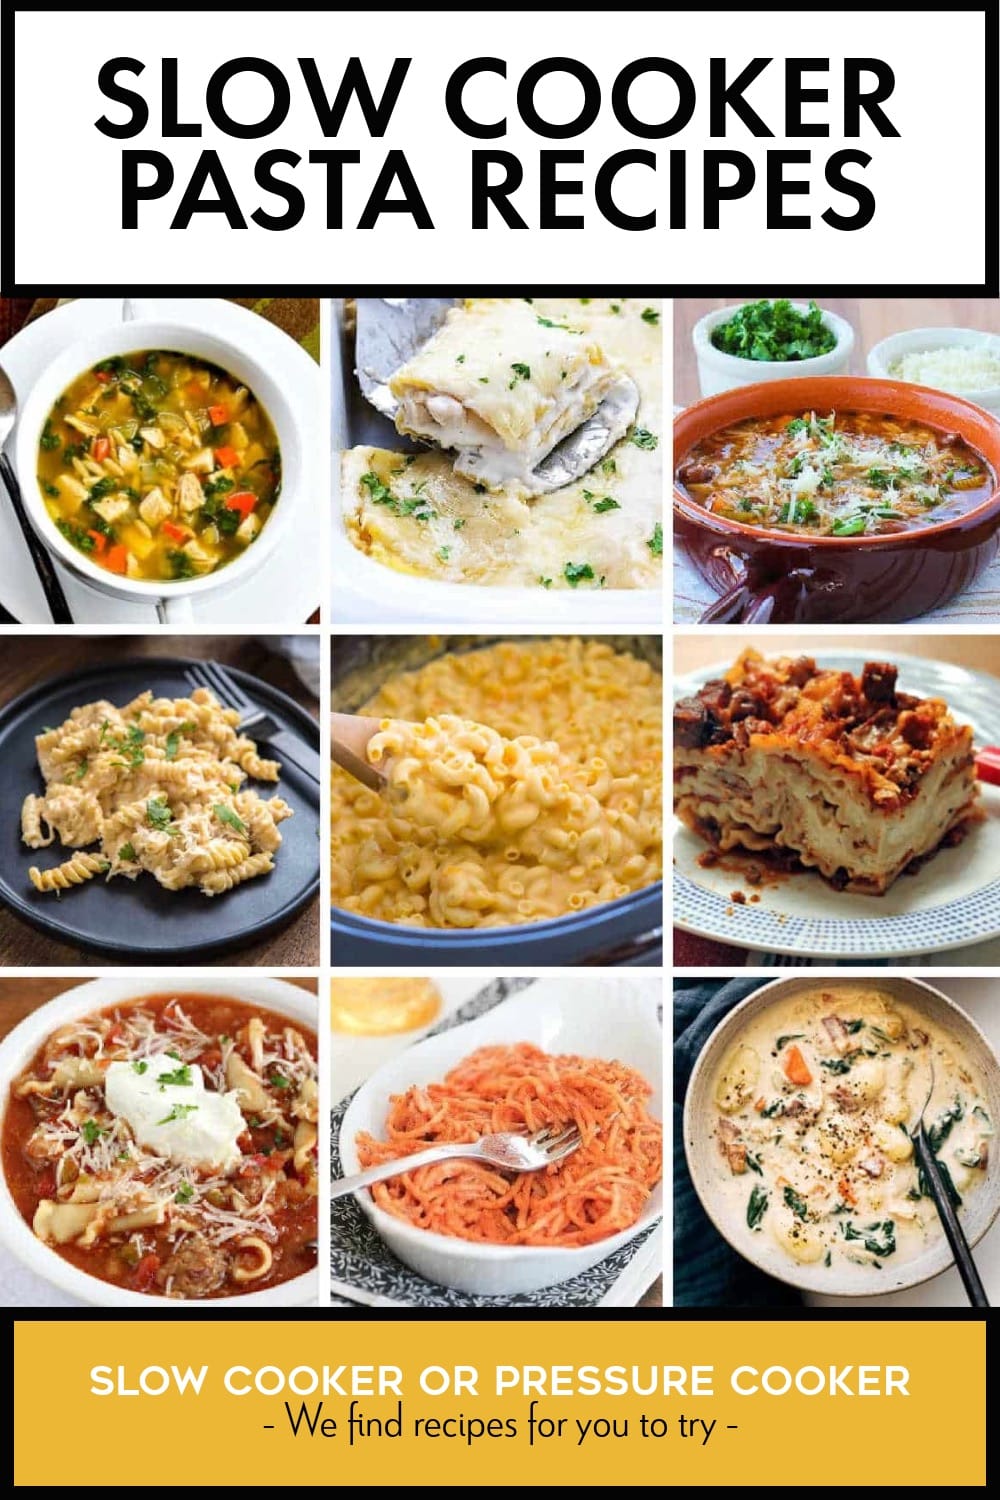 Pinterest image of Slow Cooker Pasta Recipes